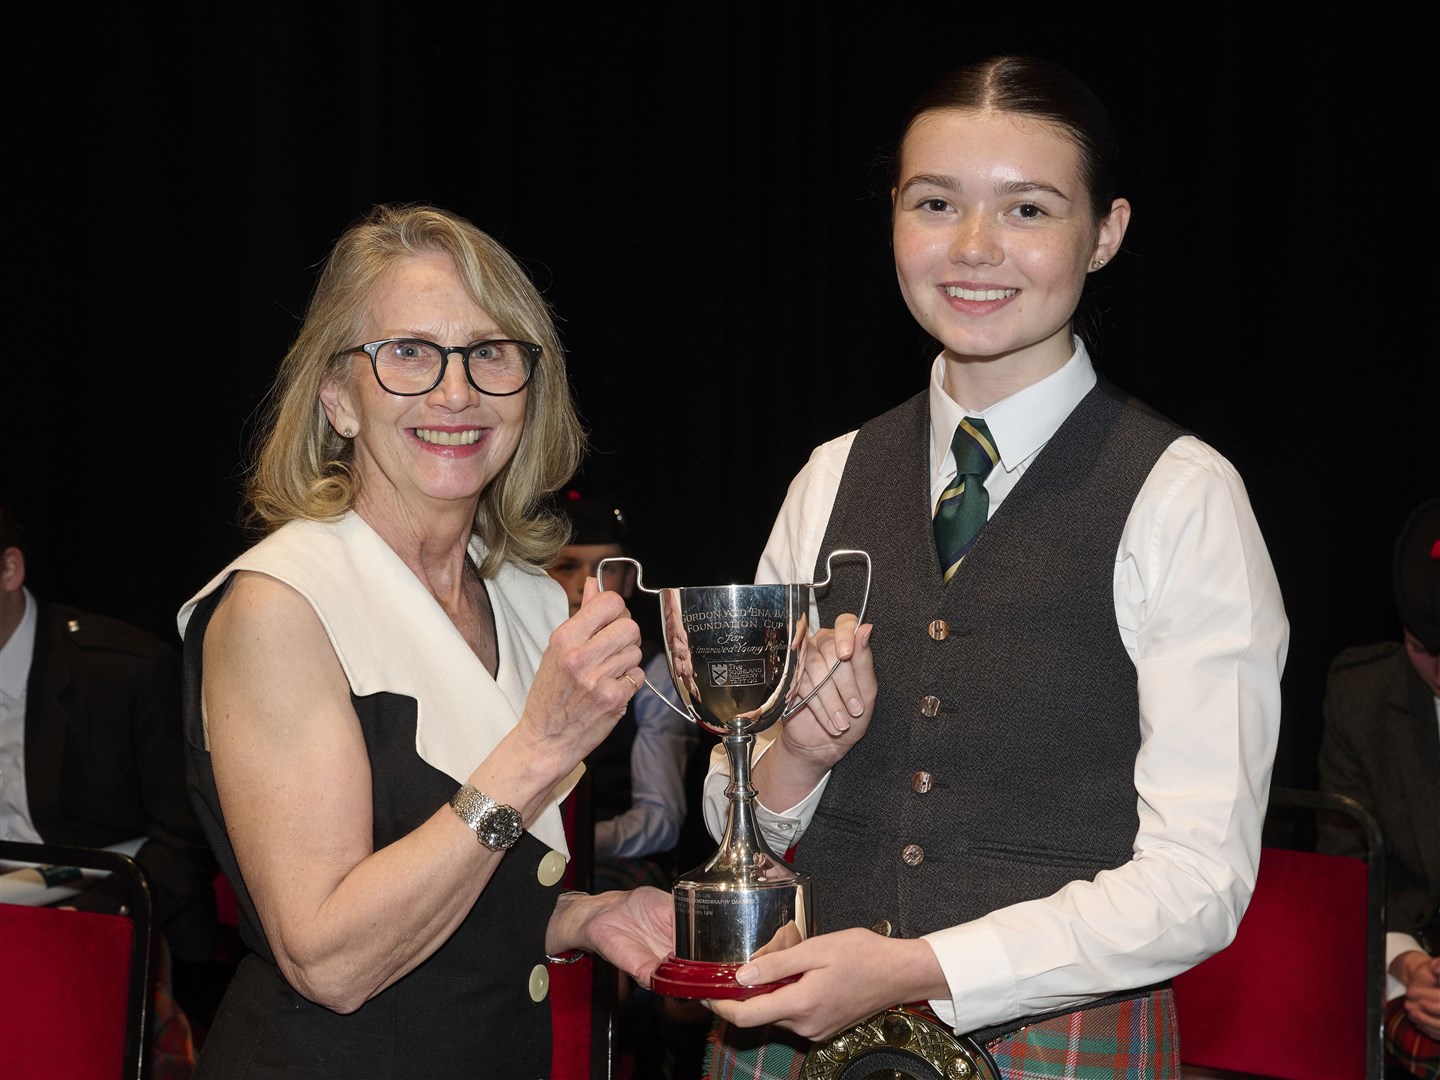 Grace Kelman being awarded the Gordon and Ena Baxter Foundation Cup for Best Junior Piper in the Highlands and Moray.